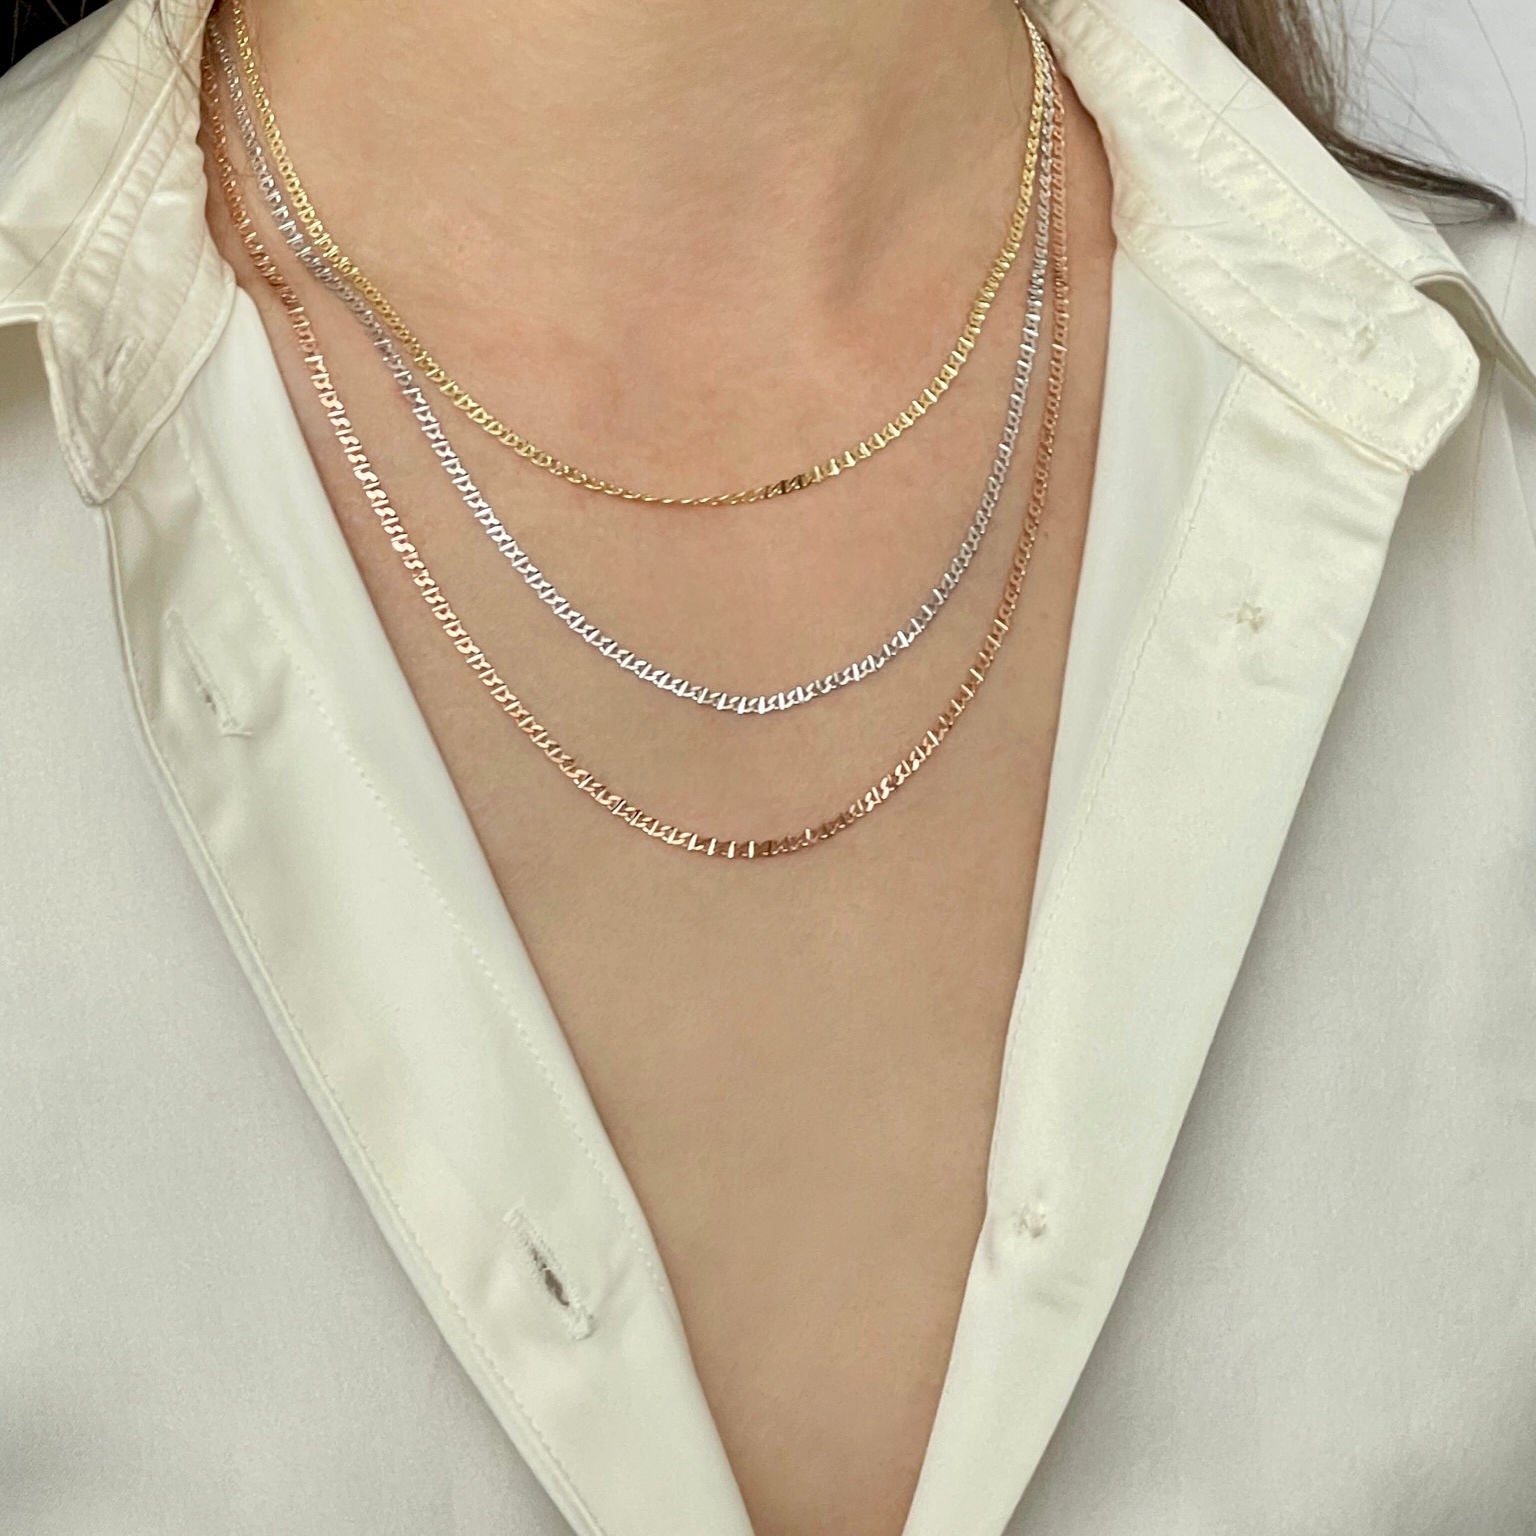 14K Solid Rose Gold Mariner Necklace Chain Women